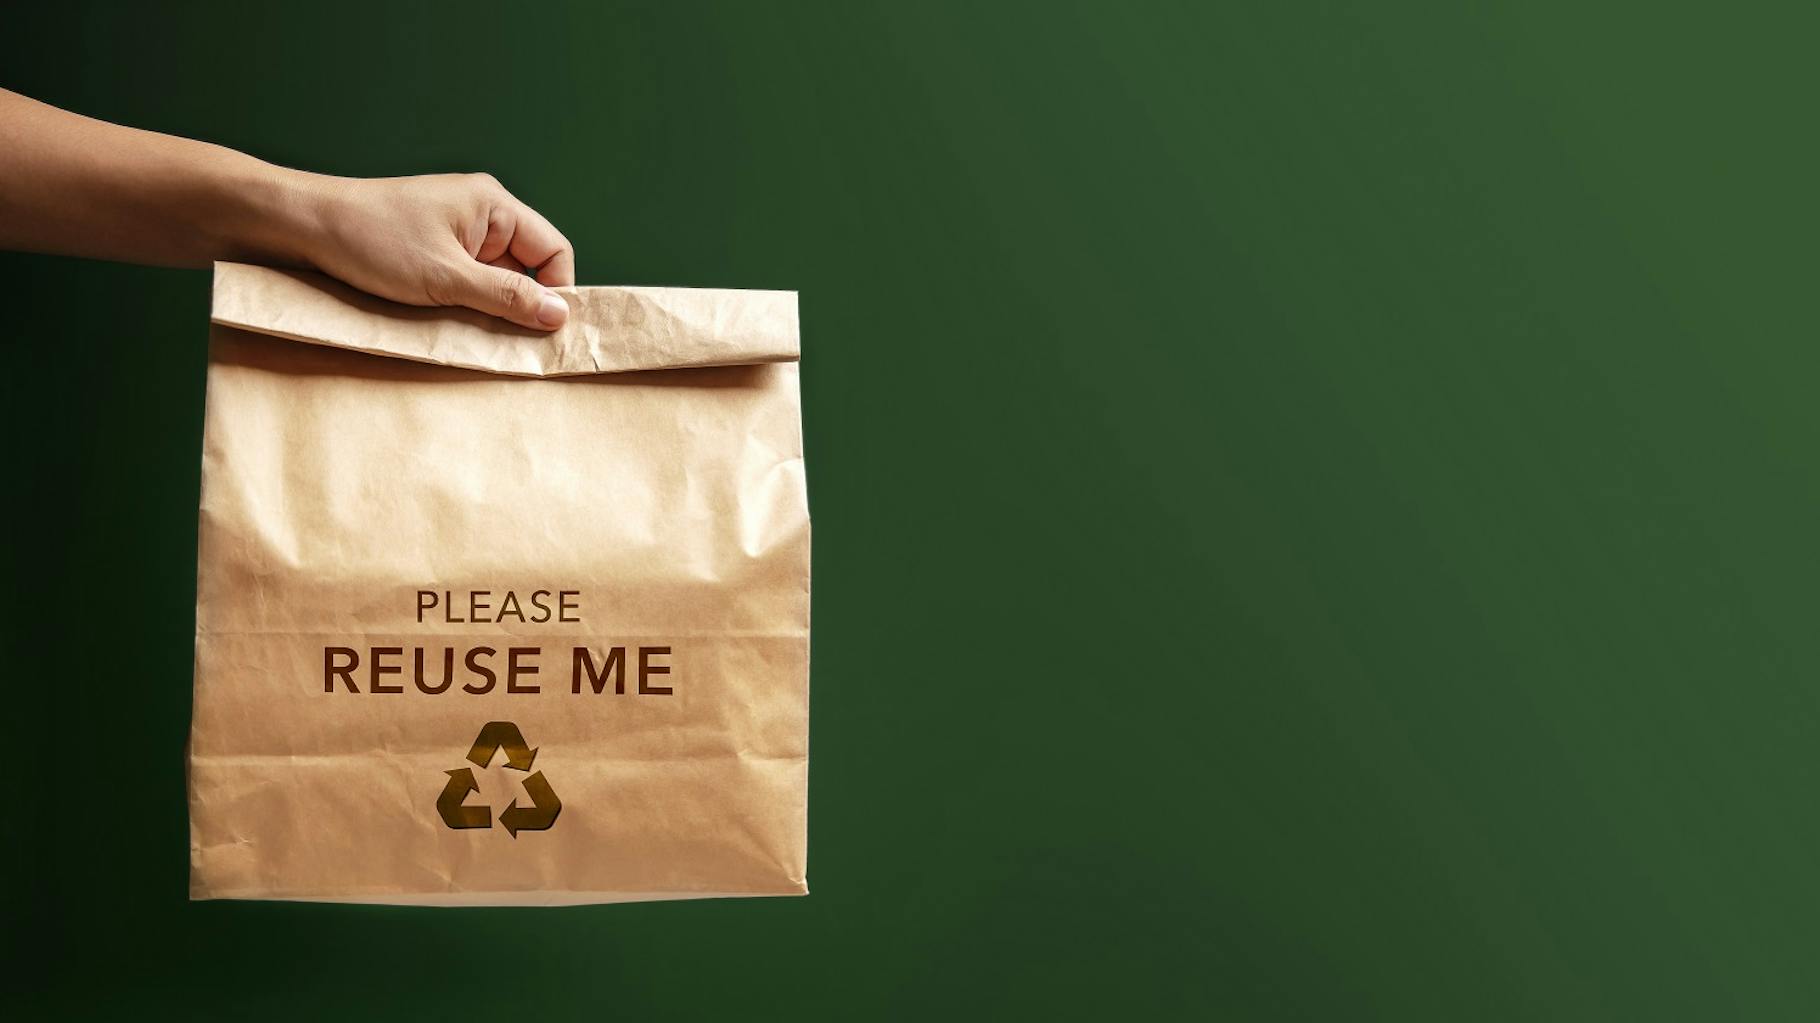 A rolled-up paper bag held by a woman's hand and labelled "Please release me" illustrates the topic of the crsd sustainability reporting